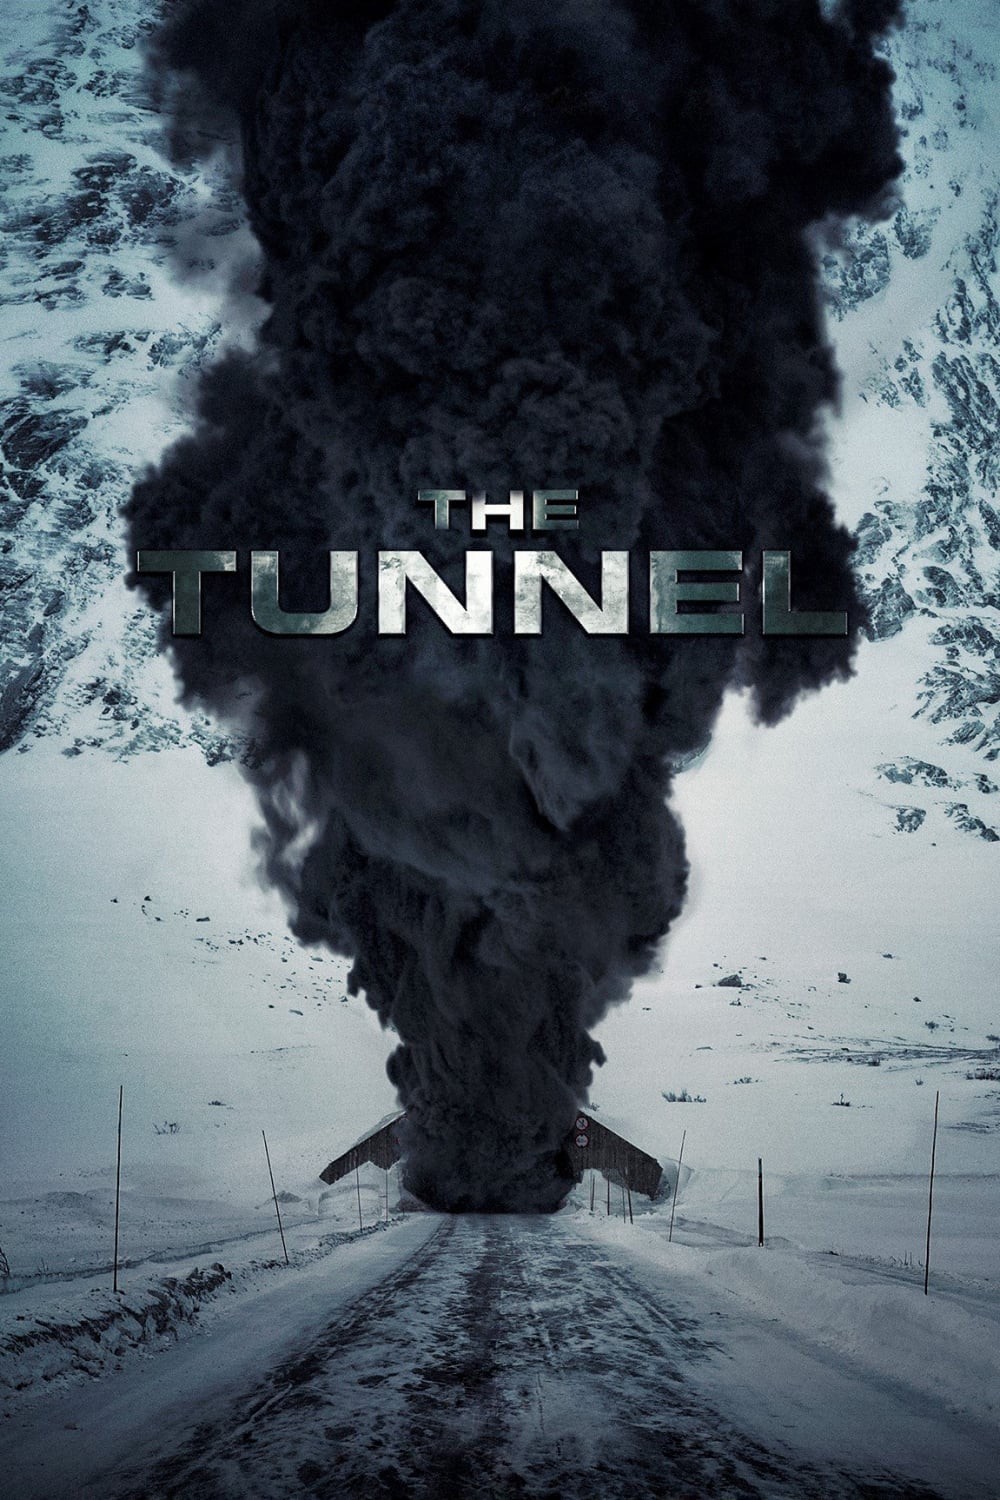 The Tunnel | The Tunnel (2019)